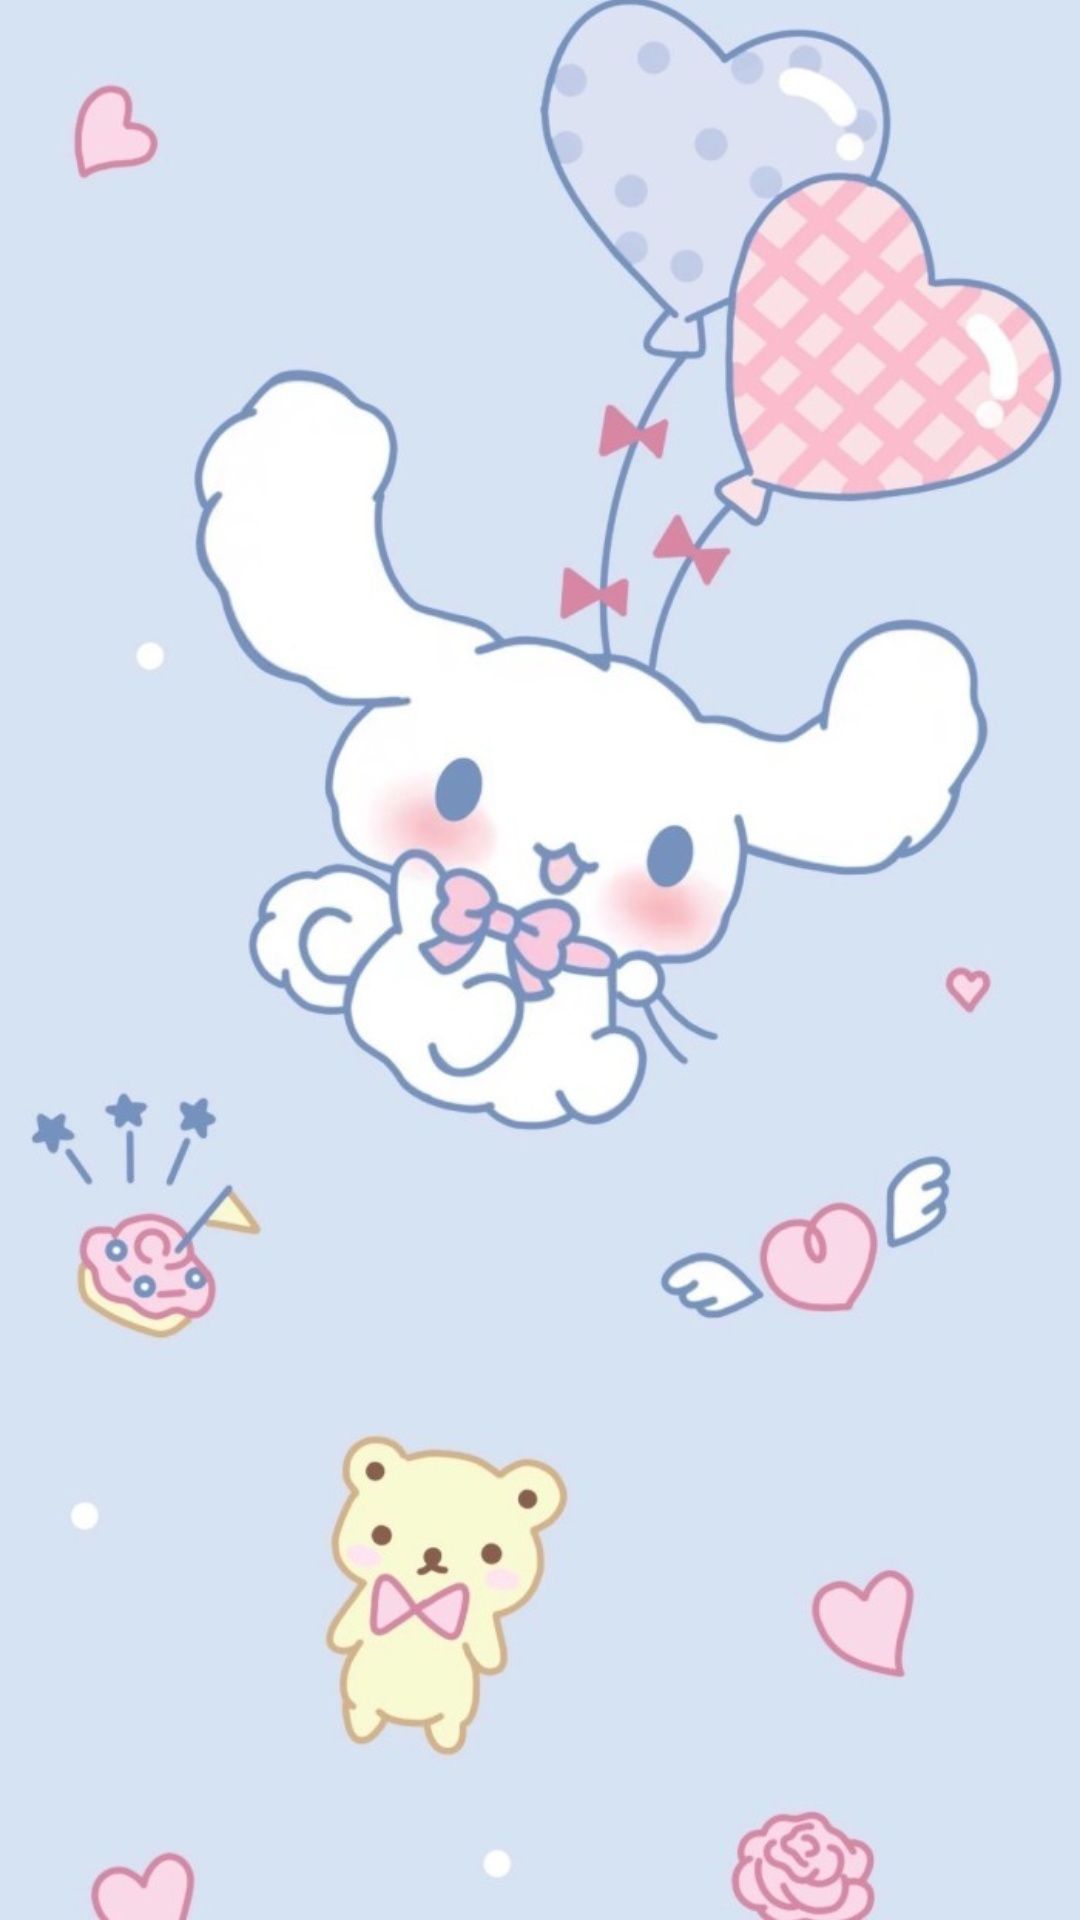 Cute wallpaper of a bunny flying with balloons and a teddy bear - Cinnamoroll